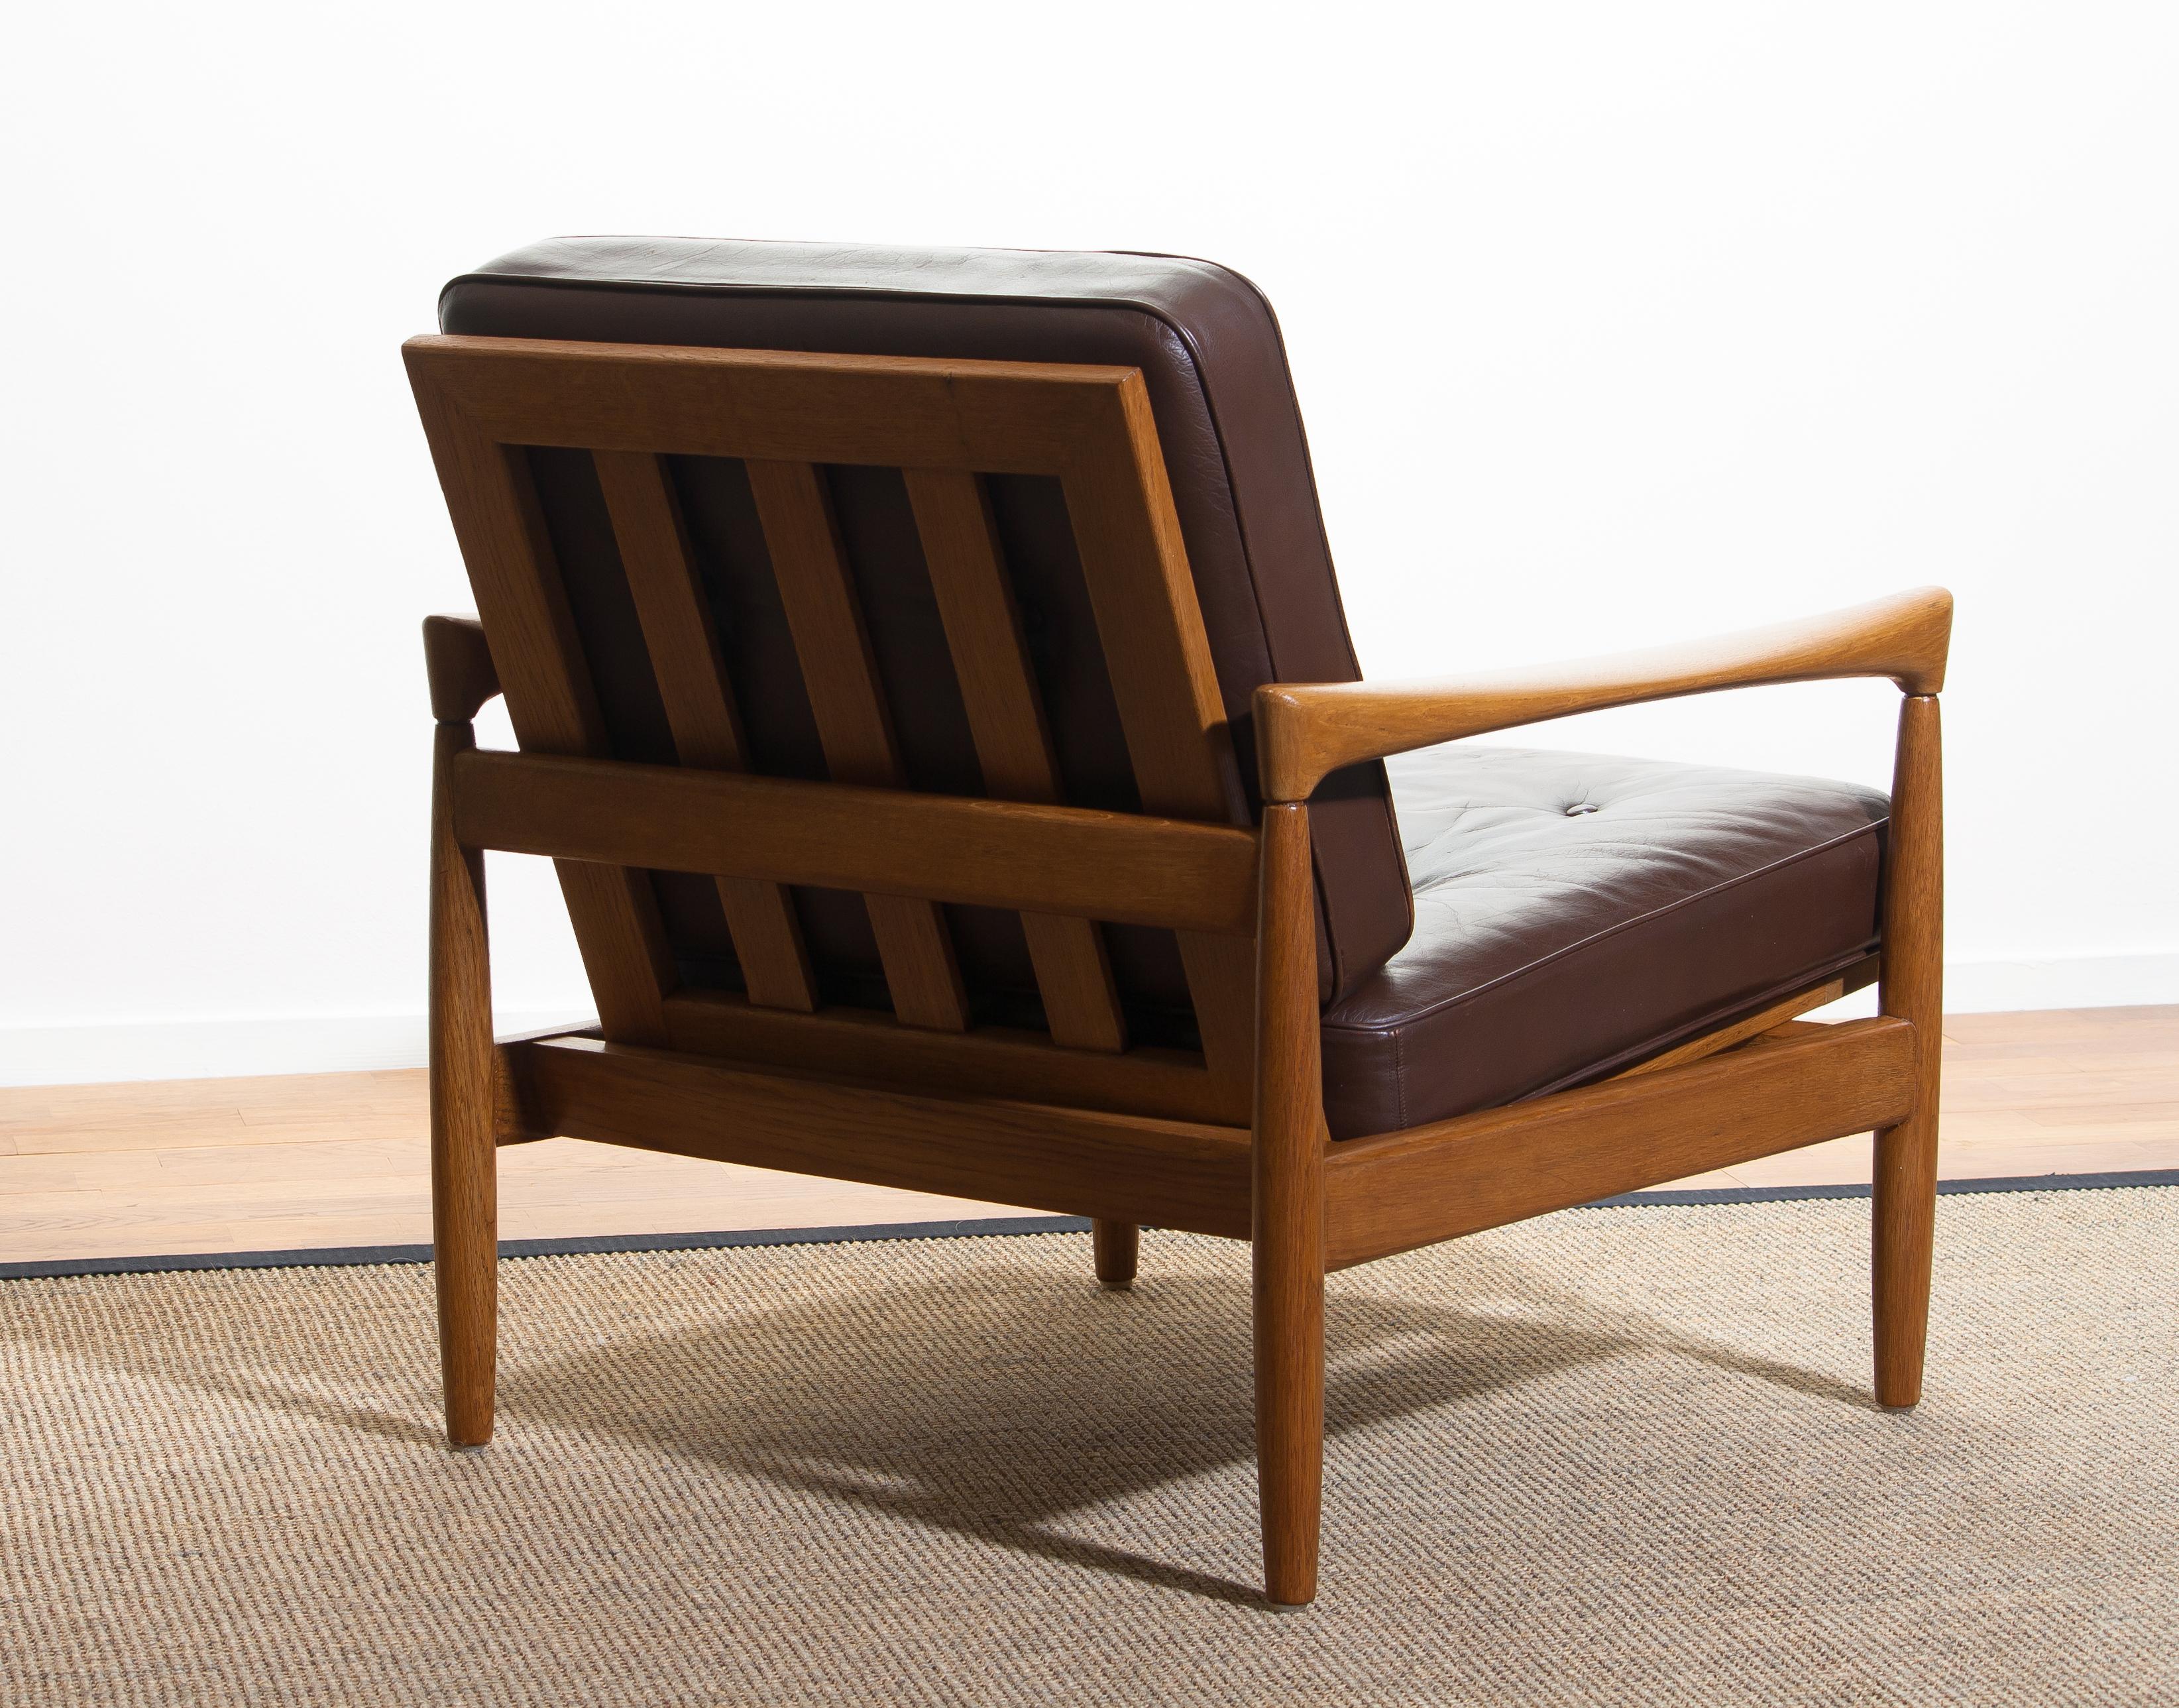 1960s, Oak and Brown Leather Lounge Chair by Erik Wörtz for Bröderna Anderssons 2